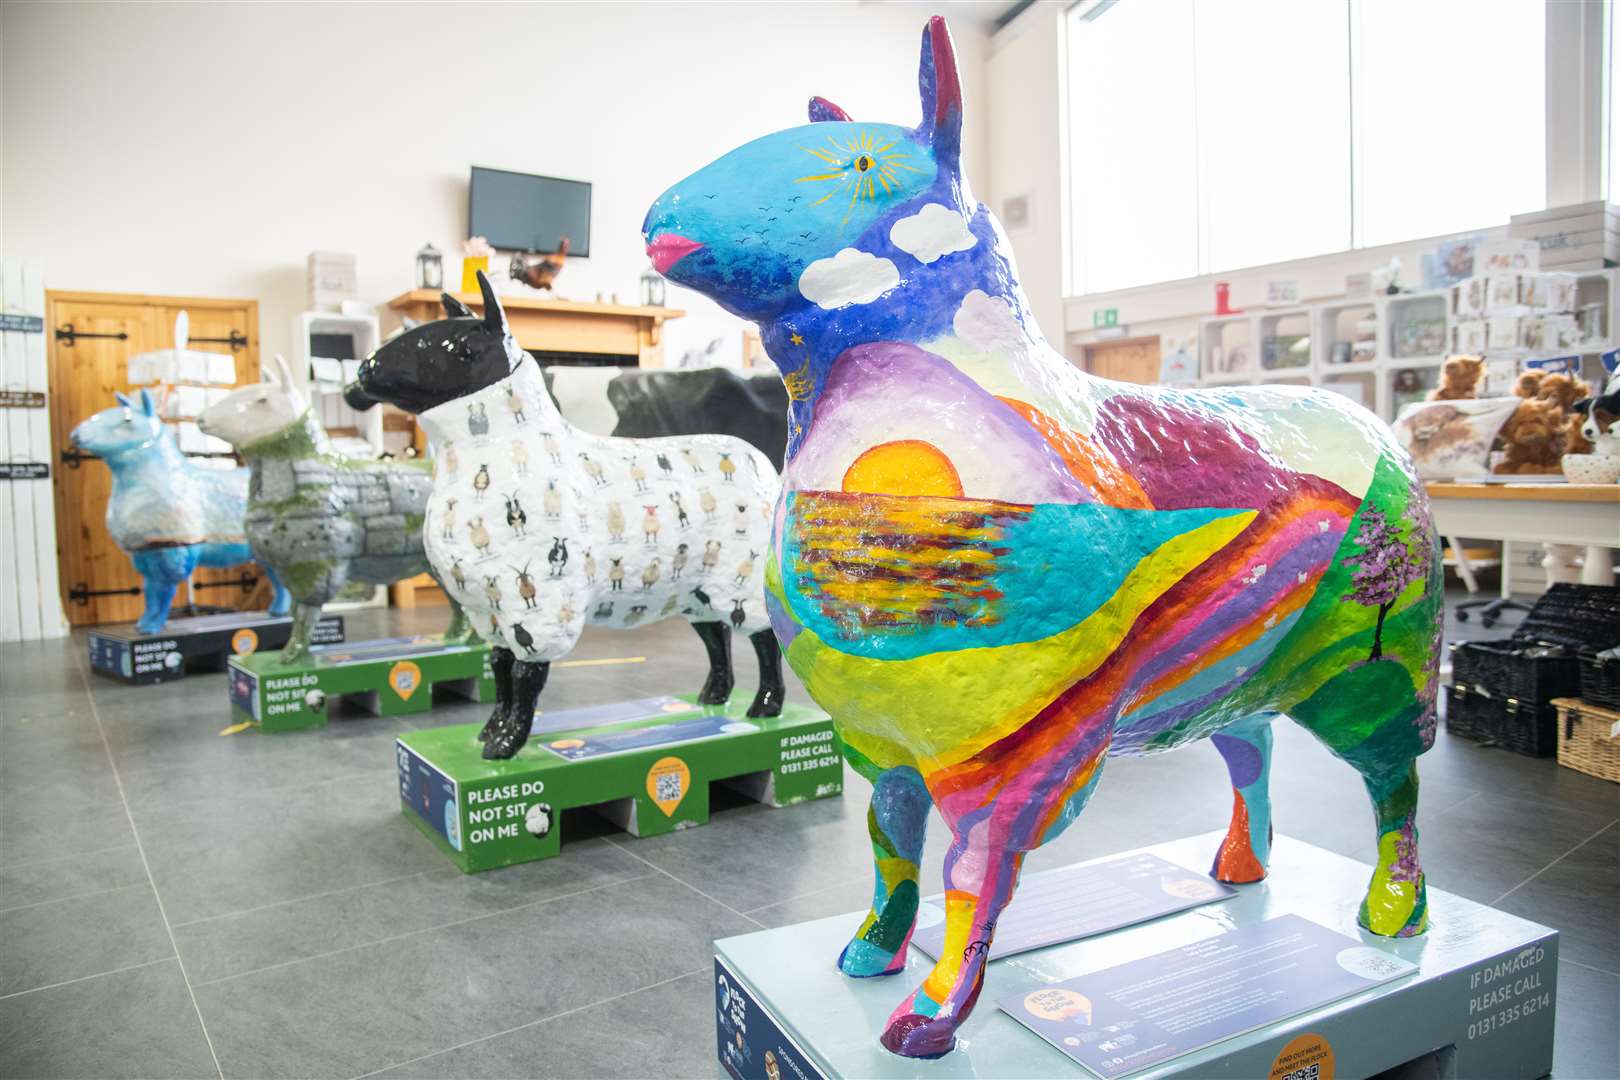 Five sheep statues were located at Allarburn Farm Shop in Elgin. Sheepscape designed by Charity McArdle, Stone By Stone designed by Victoria Randlo, The Breeds designed by Alasdair Couzens, Glen Gustavo designed by Lol Awada and Scottish Wildflowers designed by Daria Zapala. Picture: Daniel Forsyth..